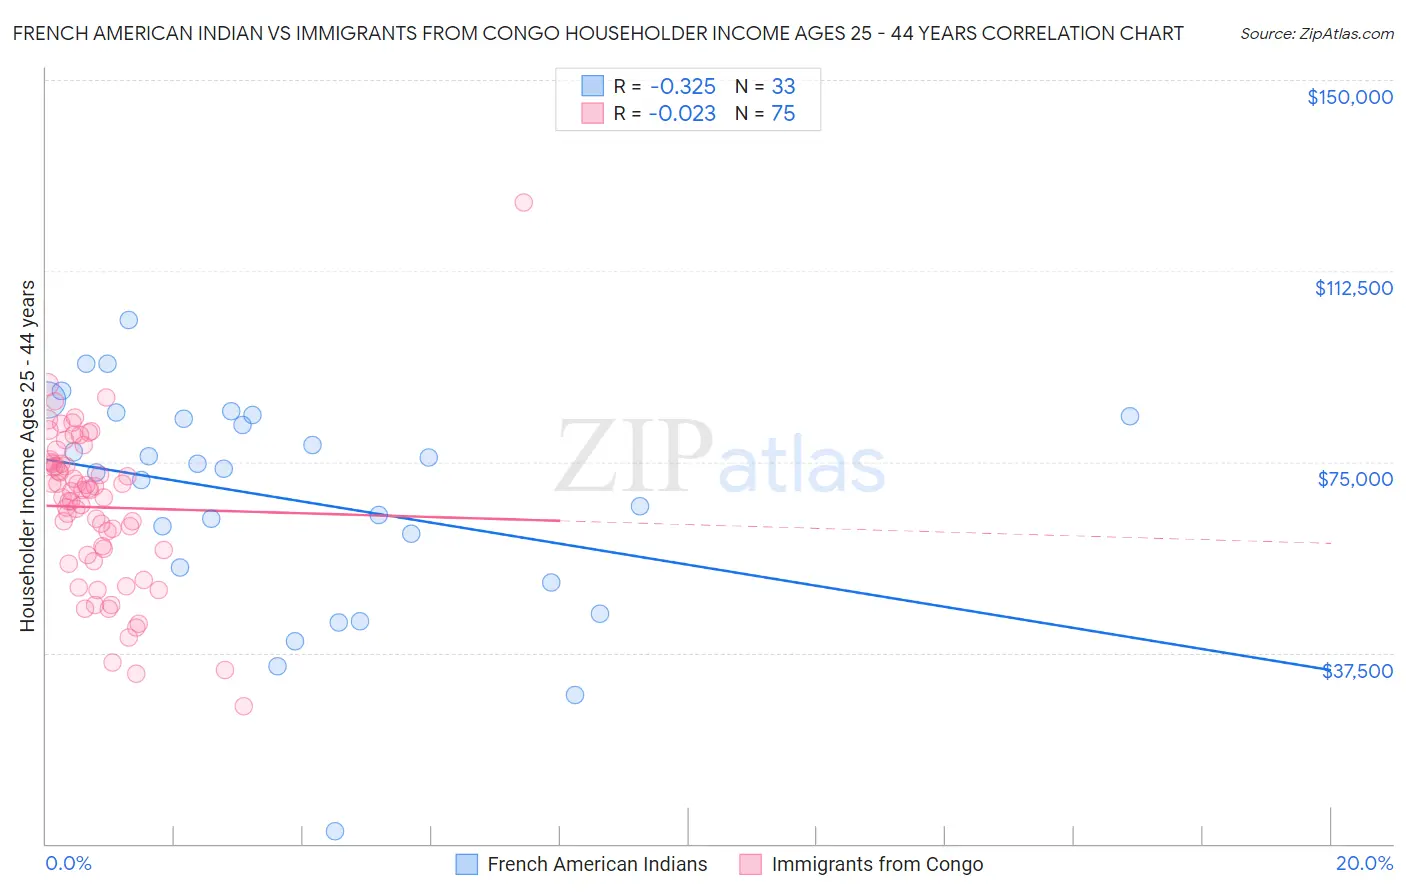 French American Indian vs Immigrants from Congo Householder Income Ages 25 - 44 years